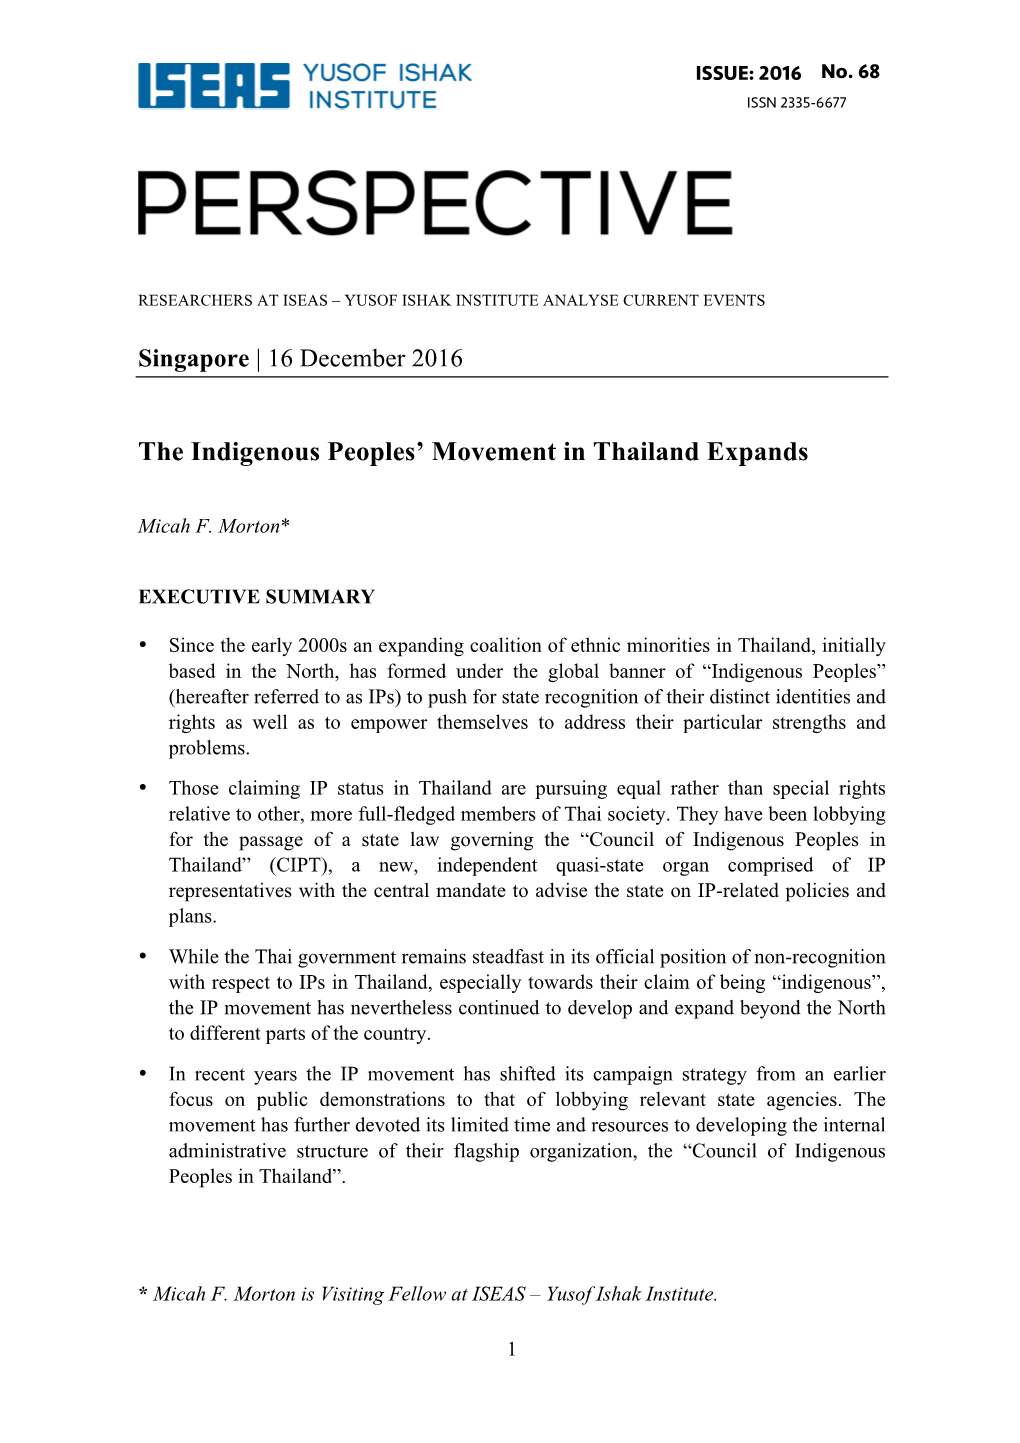 The Indigenous Peoples' Movement in Thailand Expands